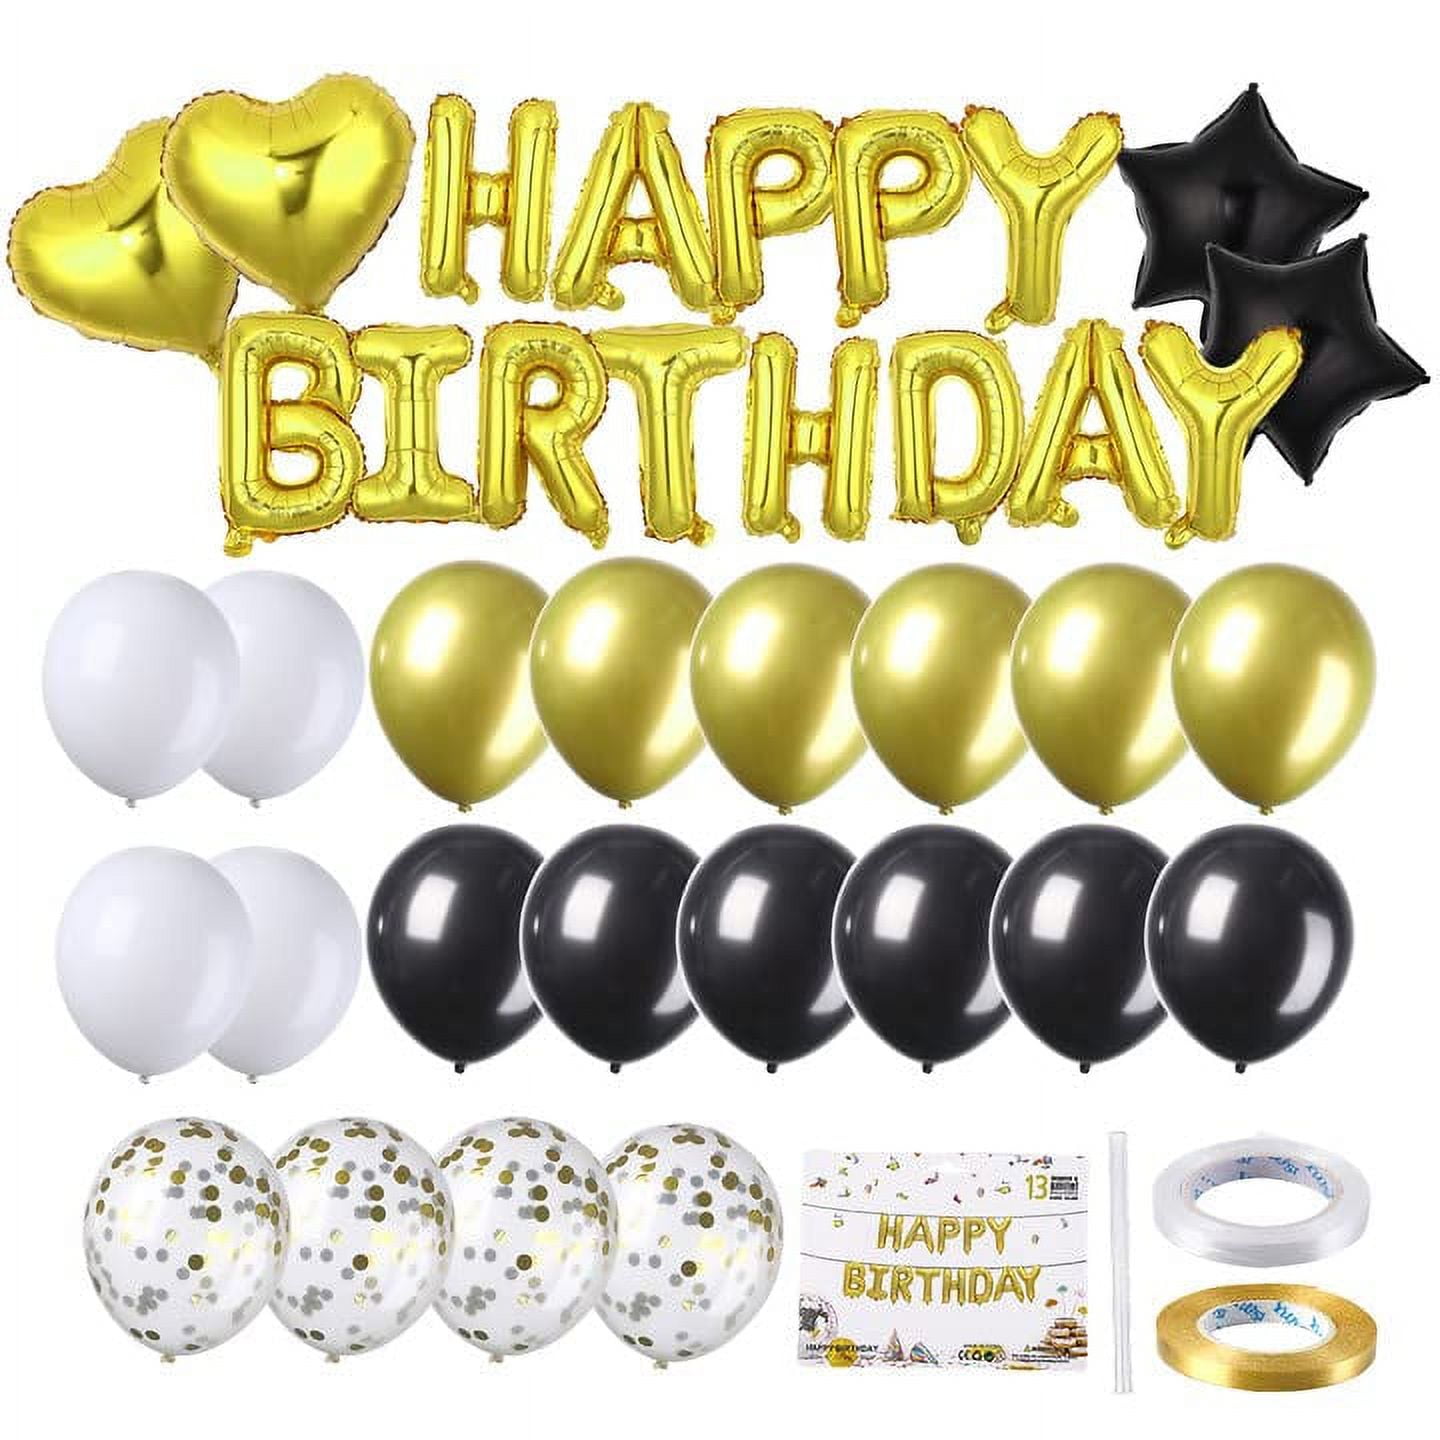 Black and White Party Decorations, Happy Birthday Decorations for Men Women  with Photography Backdrop & Tablecloth Balloons Arch Kit Banner Birthday